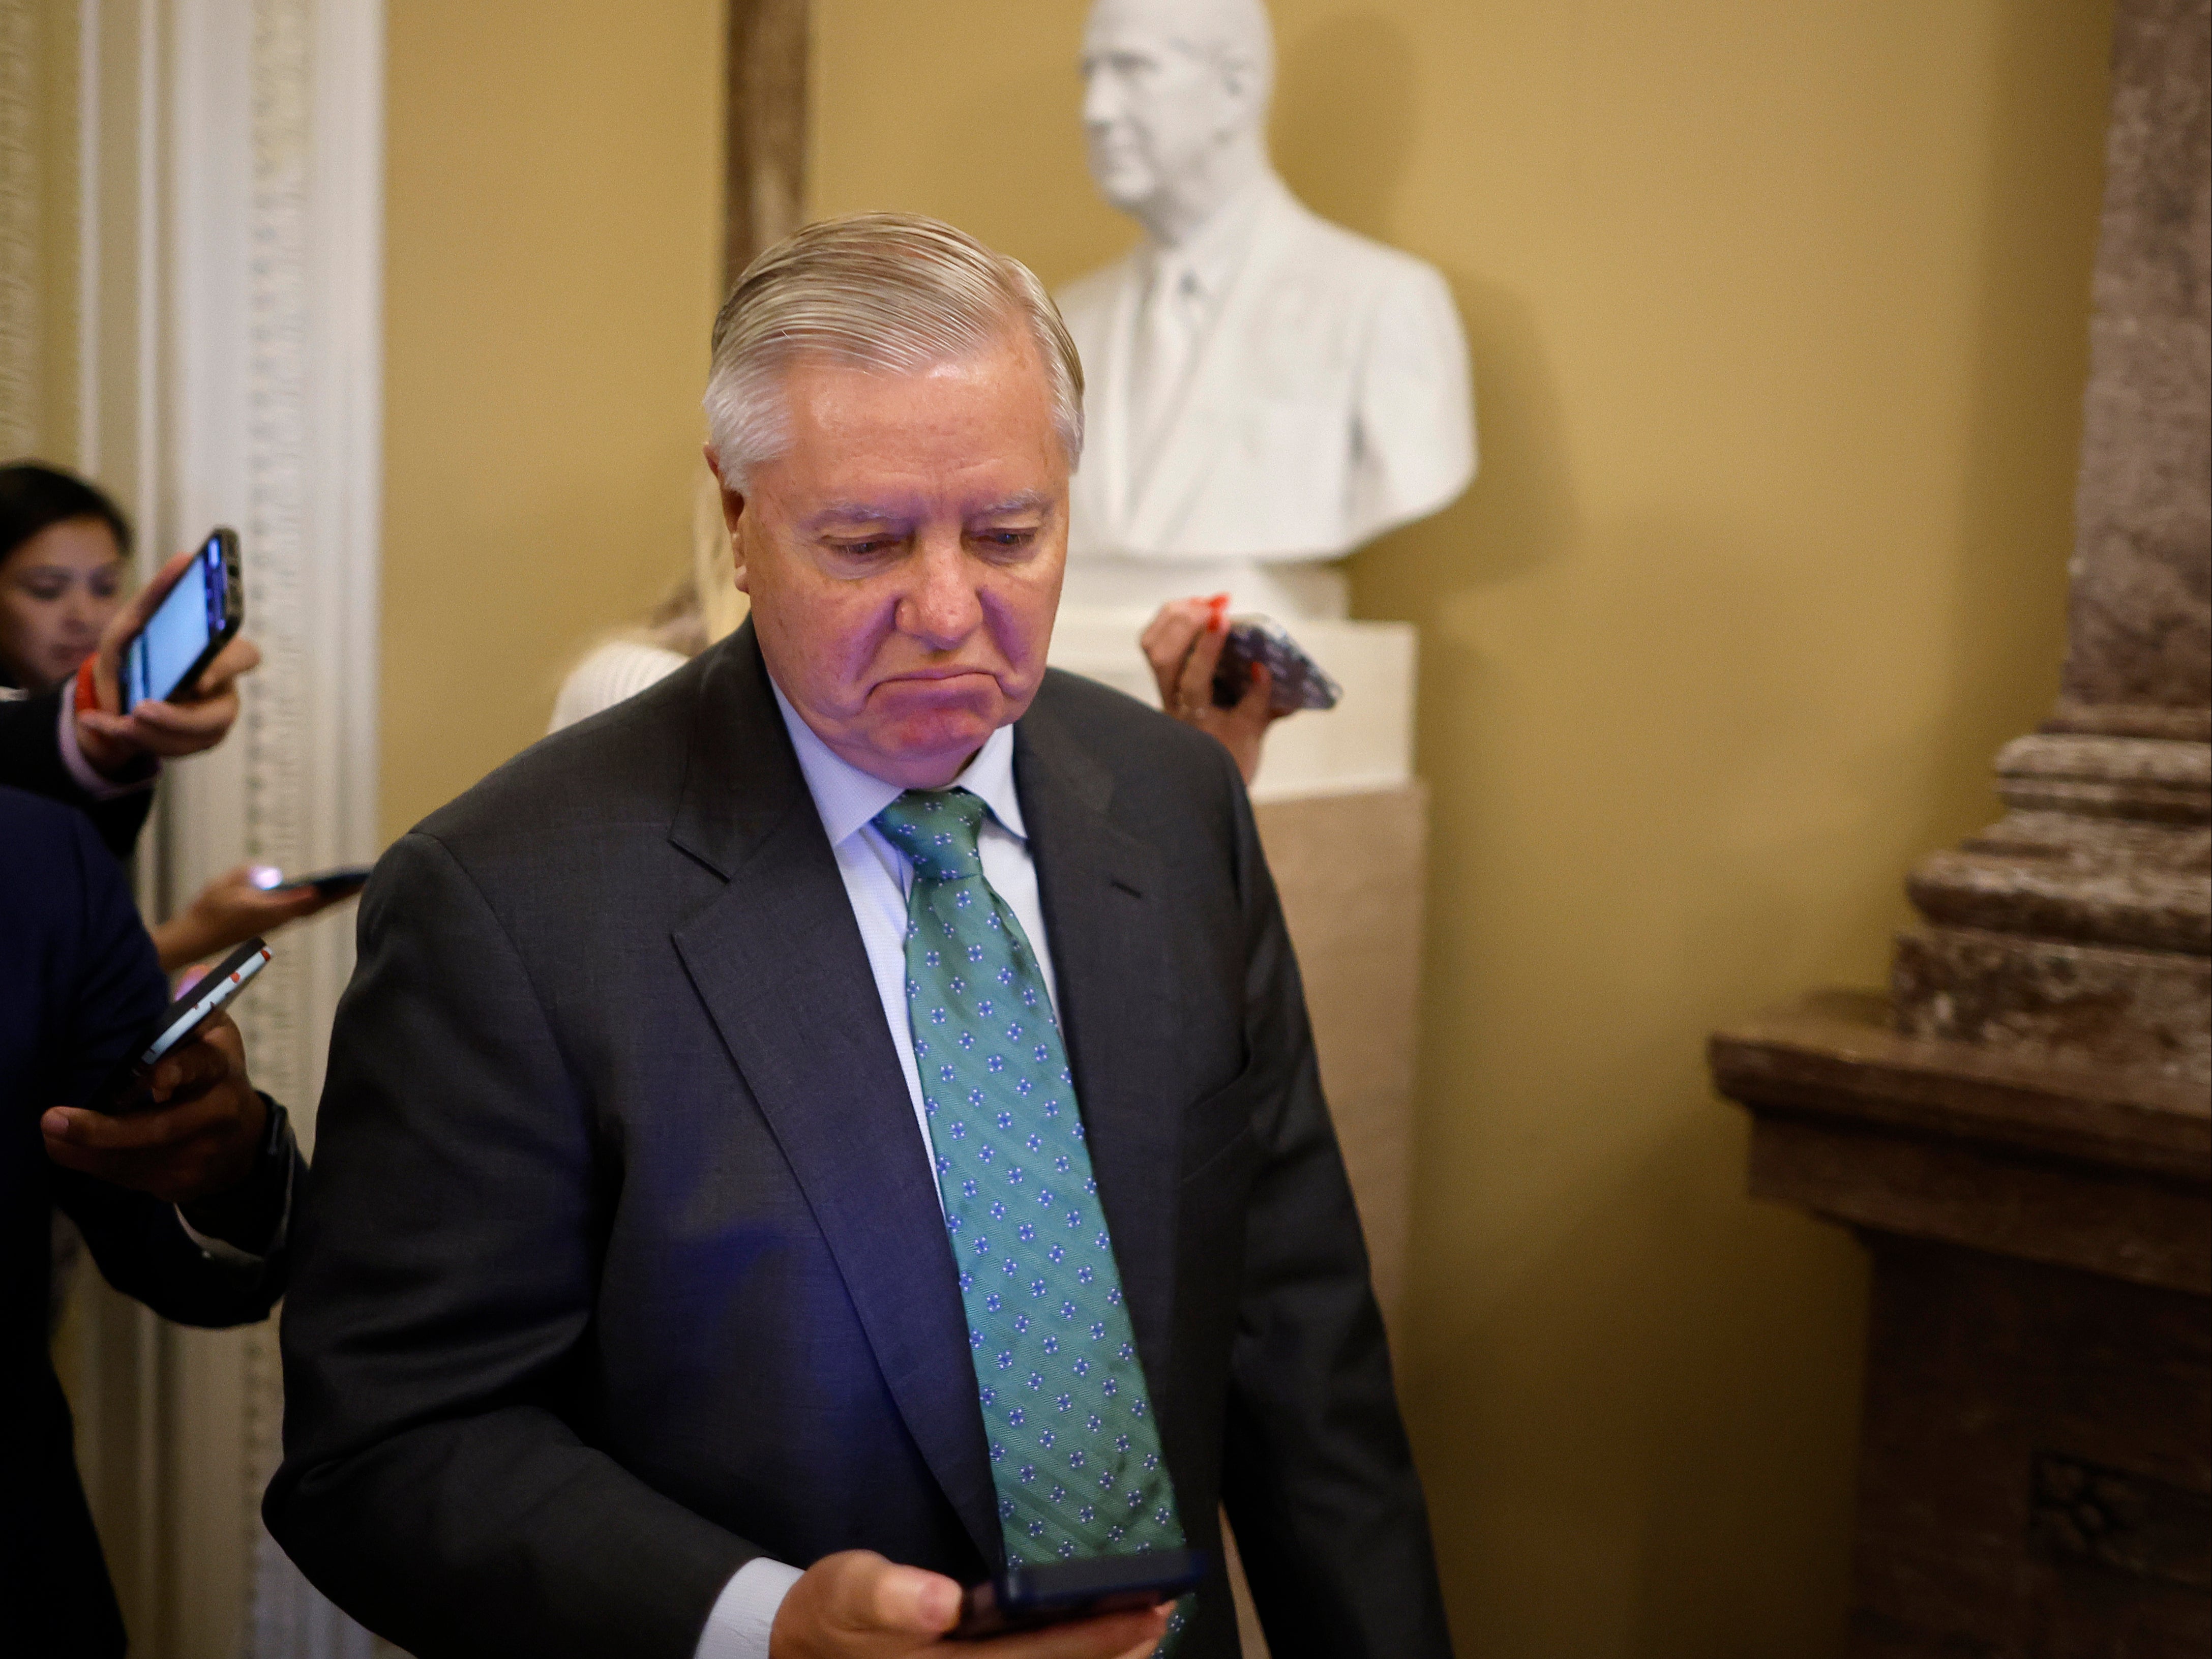 Sen. Lindsey Graham (R-SC) talks with reporters in between votes at the US Capitol